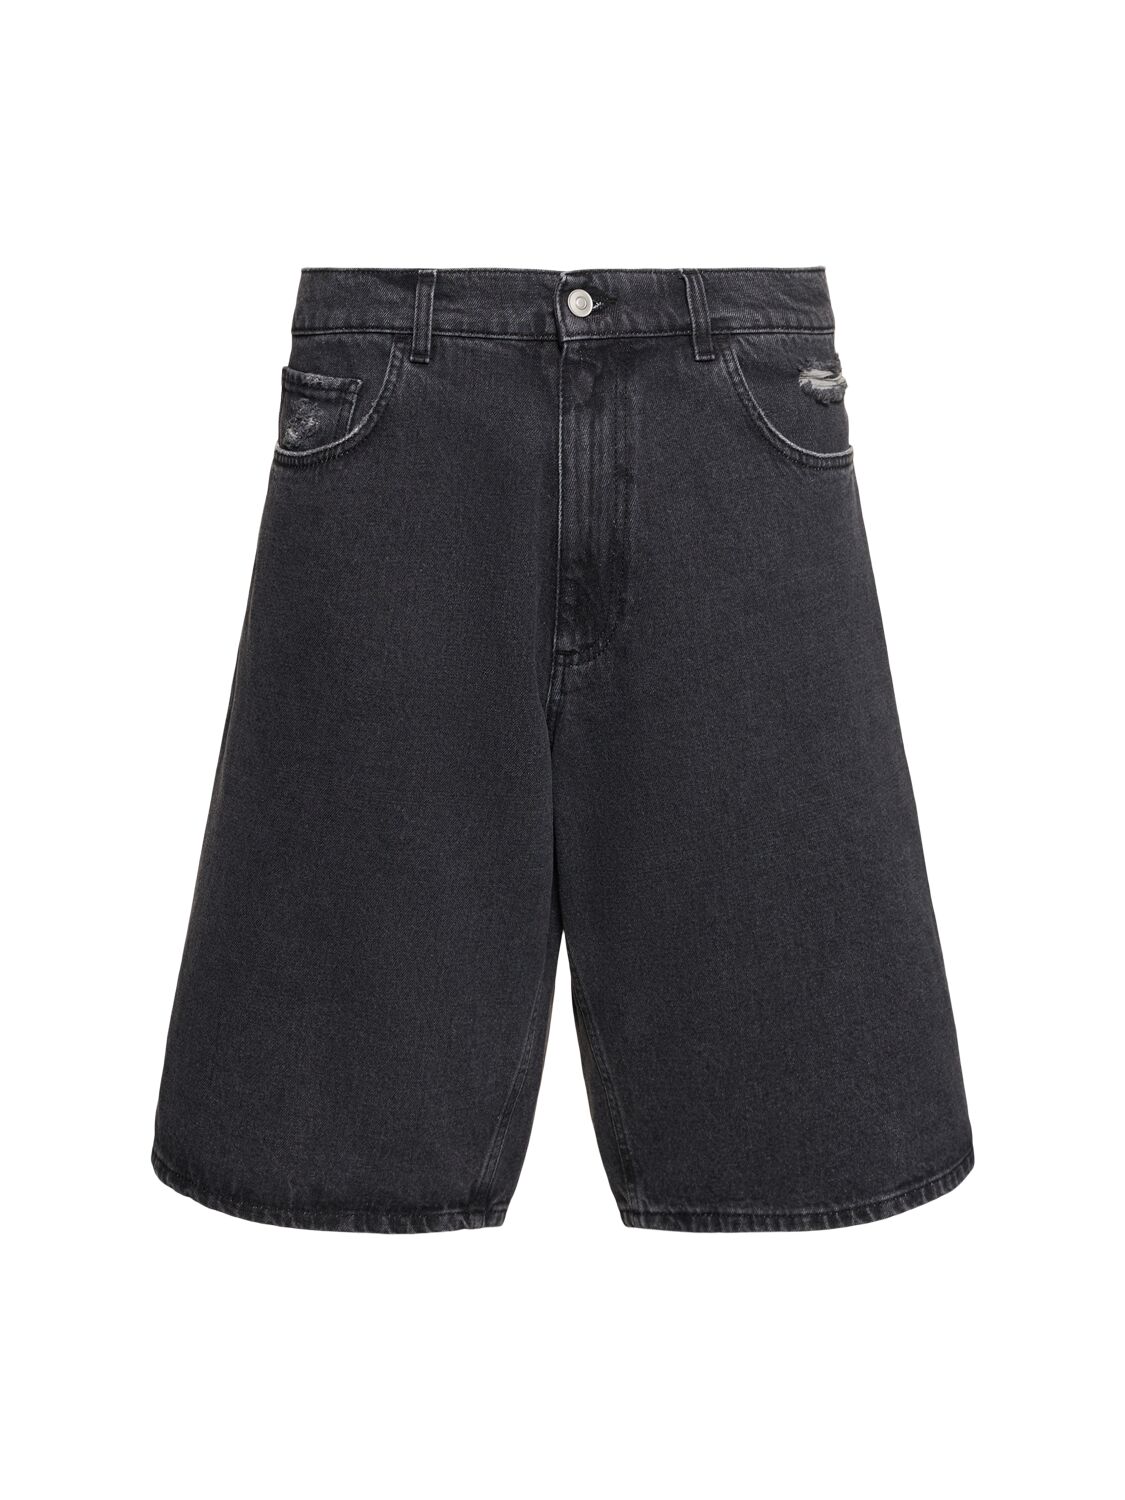 Image of Distressed Denim Shorts W/buckle